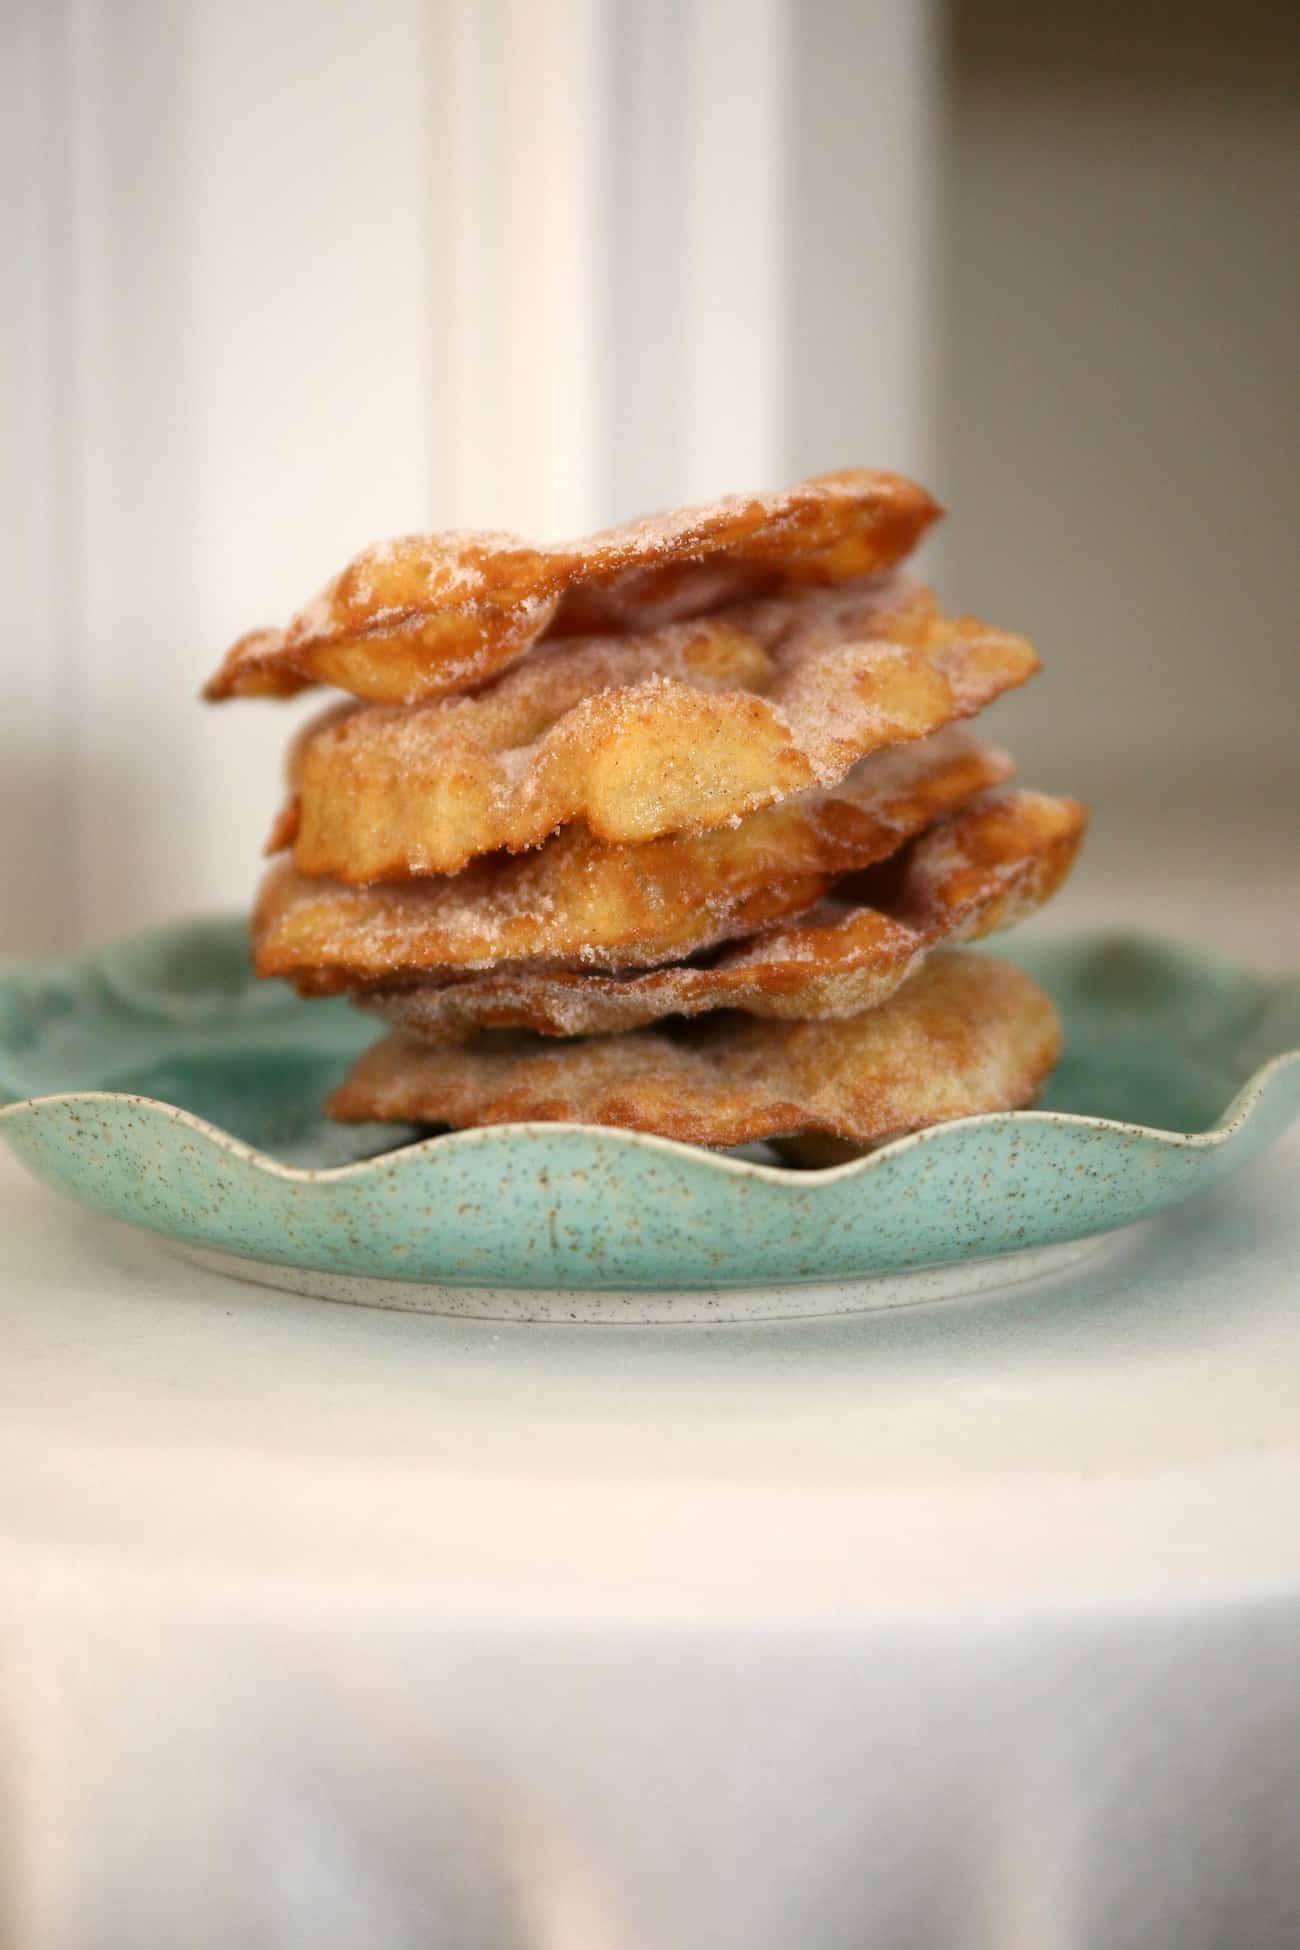 bunuelos sweet Mexican fritters piled high on a ceramic light teal plate.